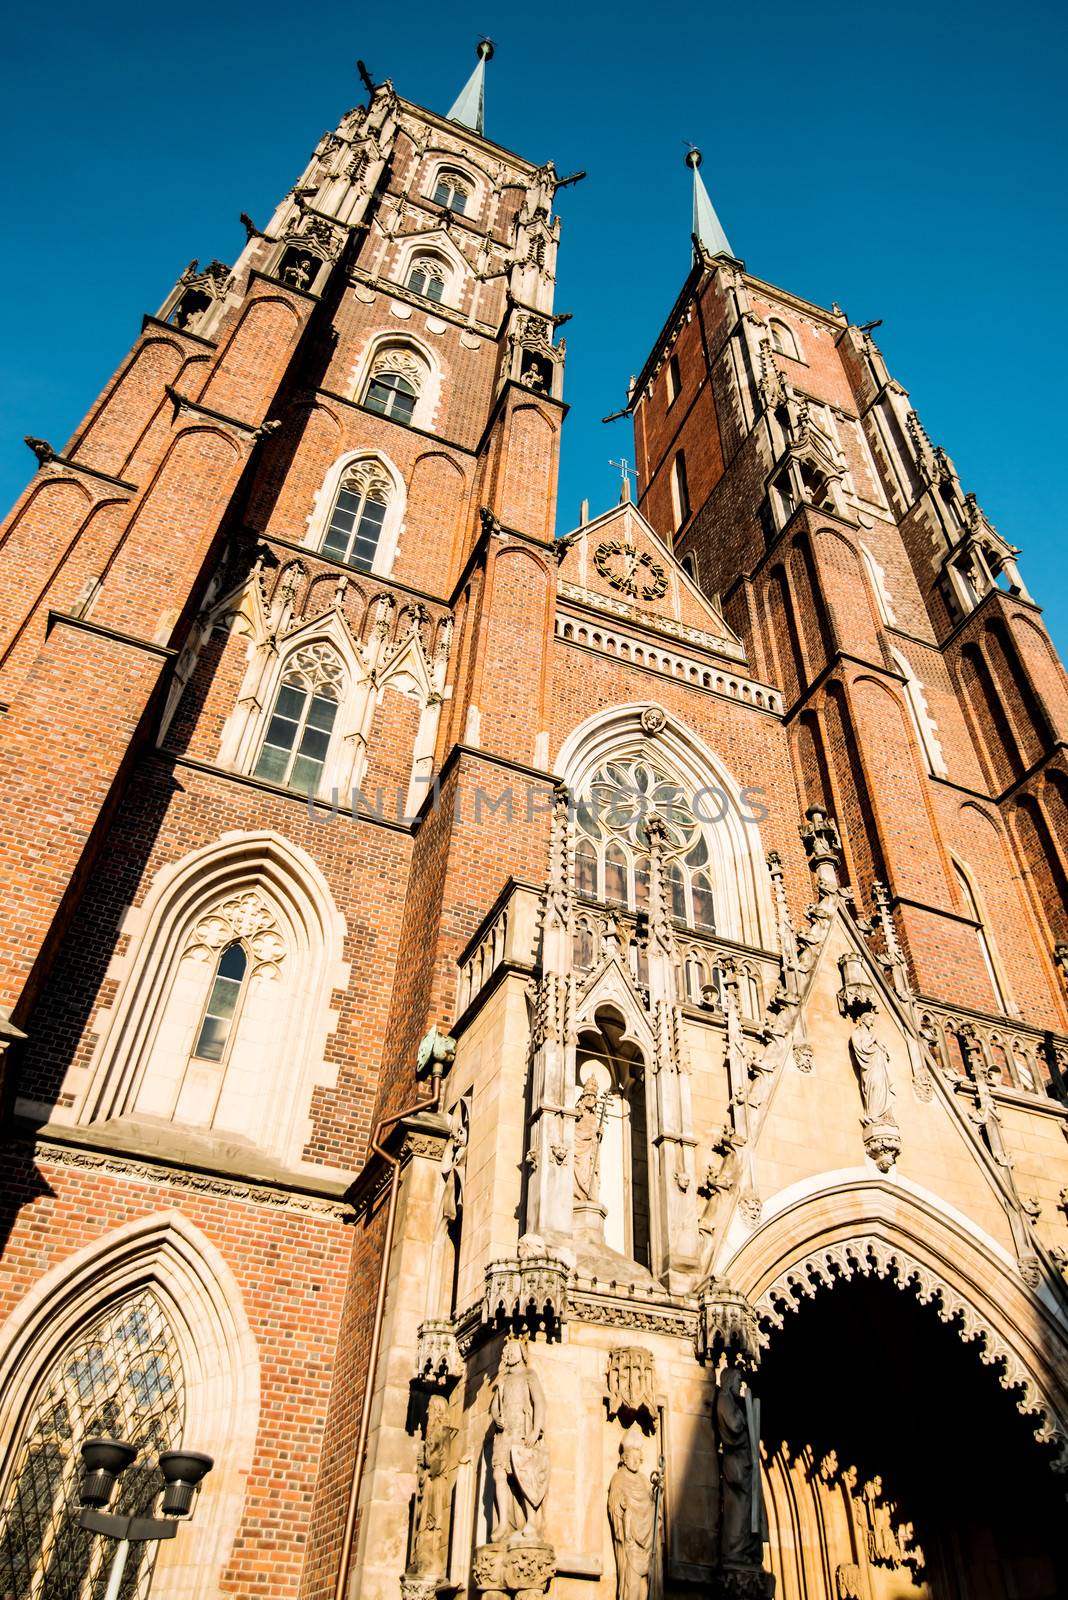 WROCLAW, POLAND - AUGUST 23: Cathedral of St. John the Baptist, The building was built in the Gothic style and is the first Gothic church in Poland on August 23, 2013 in Wroclaw, Poland